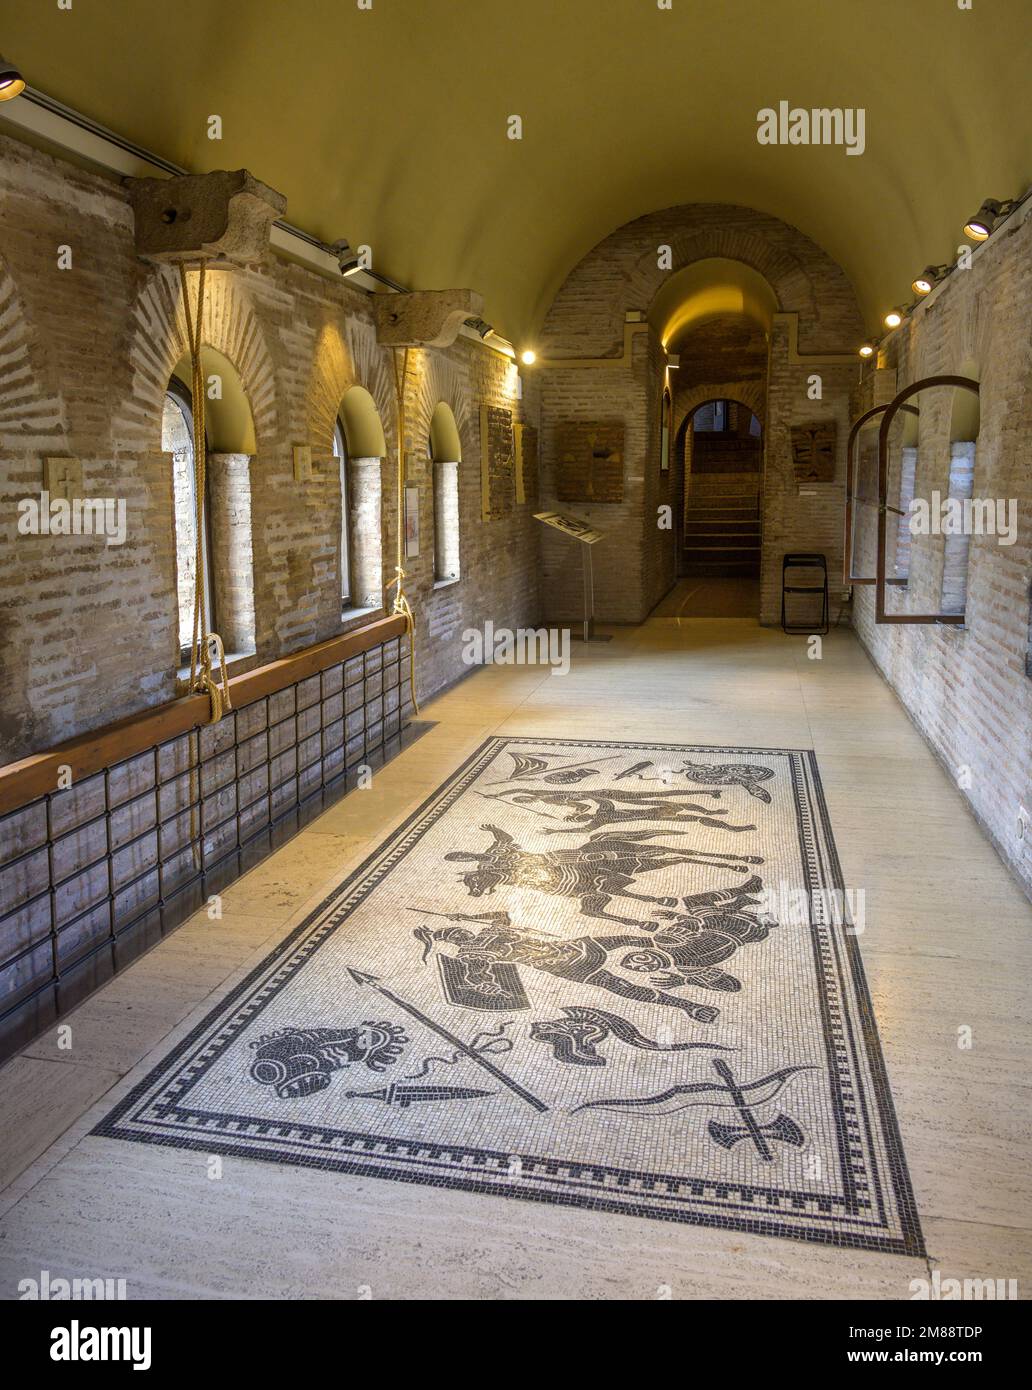 Floor mosaics in the Museo delle Mura, Rome, Italy, Europe Stock Photo